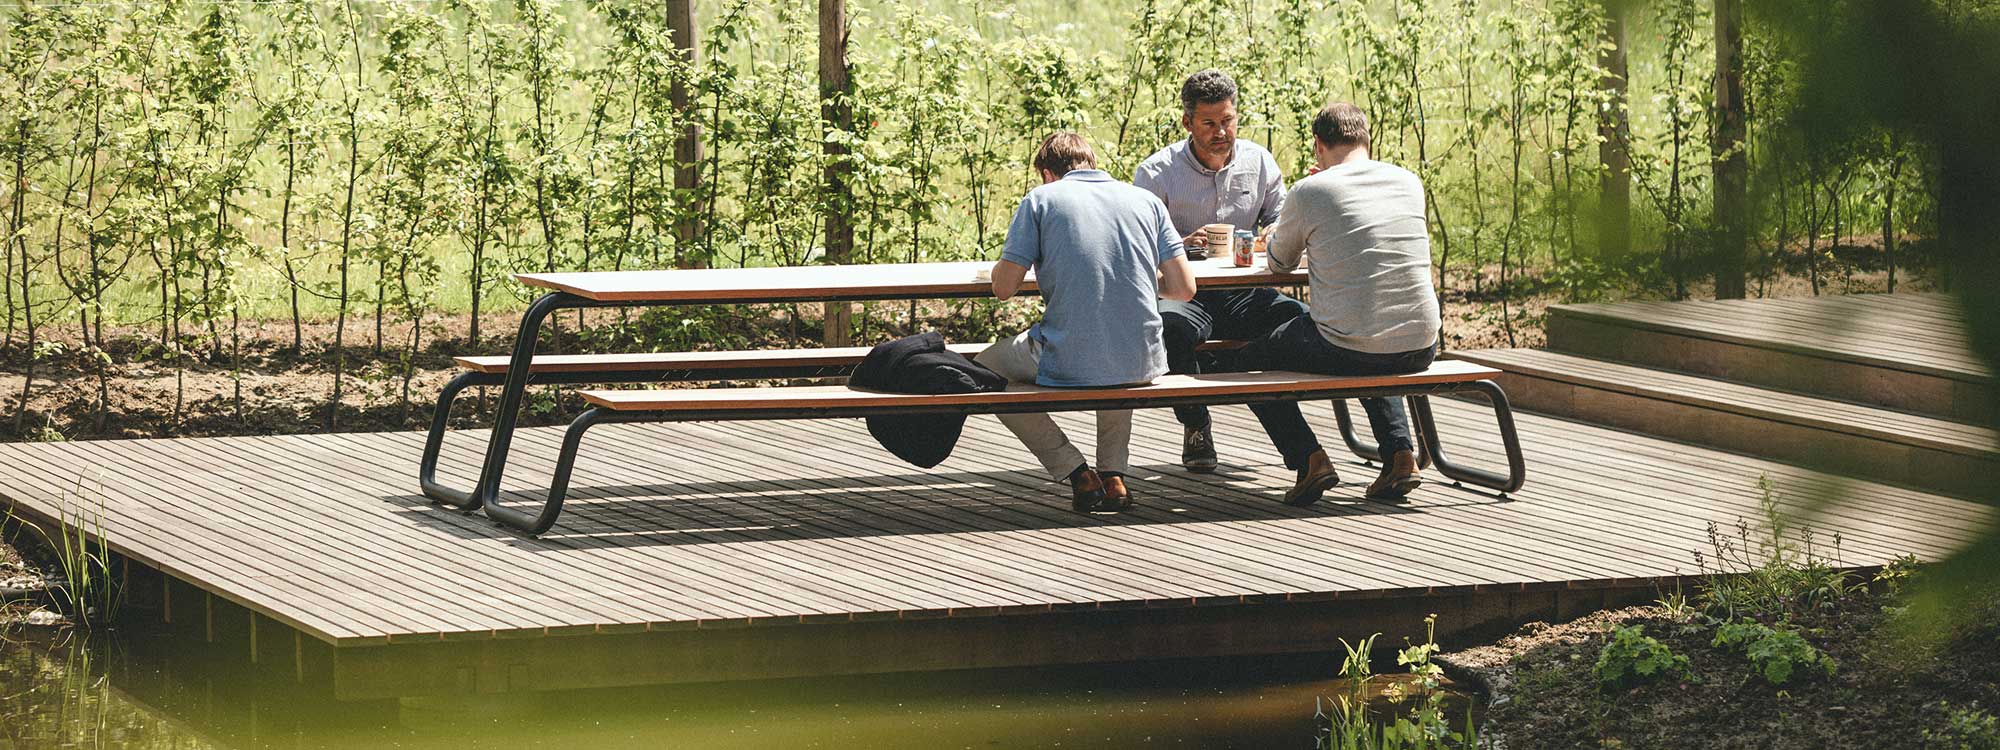 Image of The Table modern picnic table and integrated benches with tubular steel frame and afzelia hardwood surfaces, shown on raised wooden decking